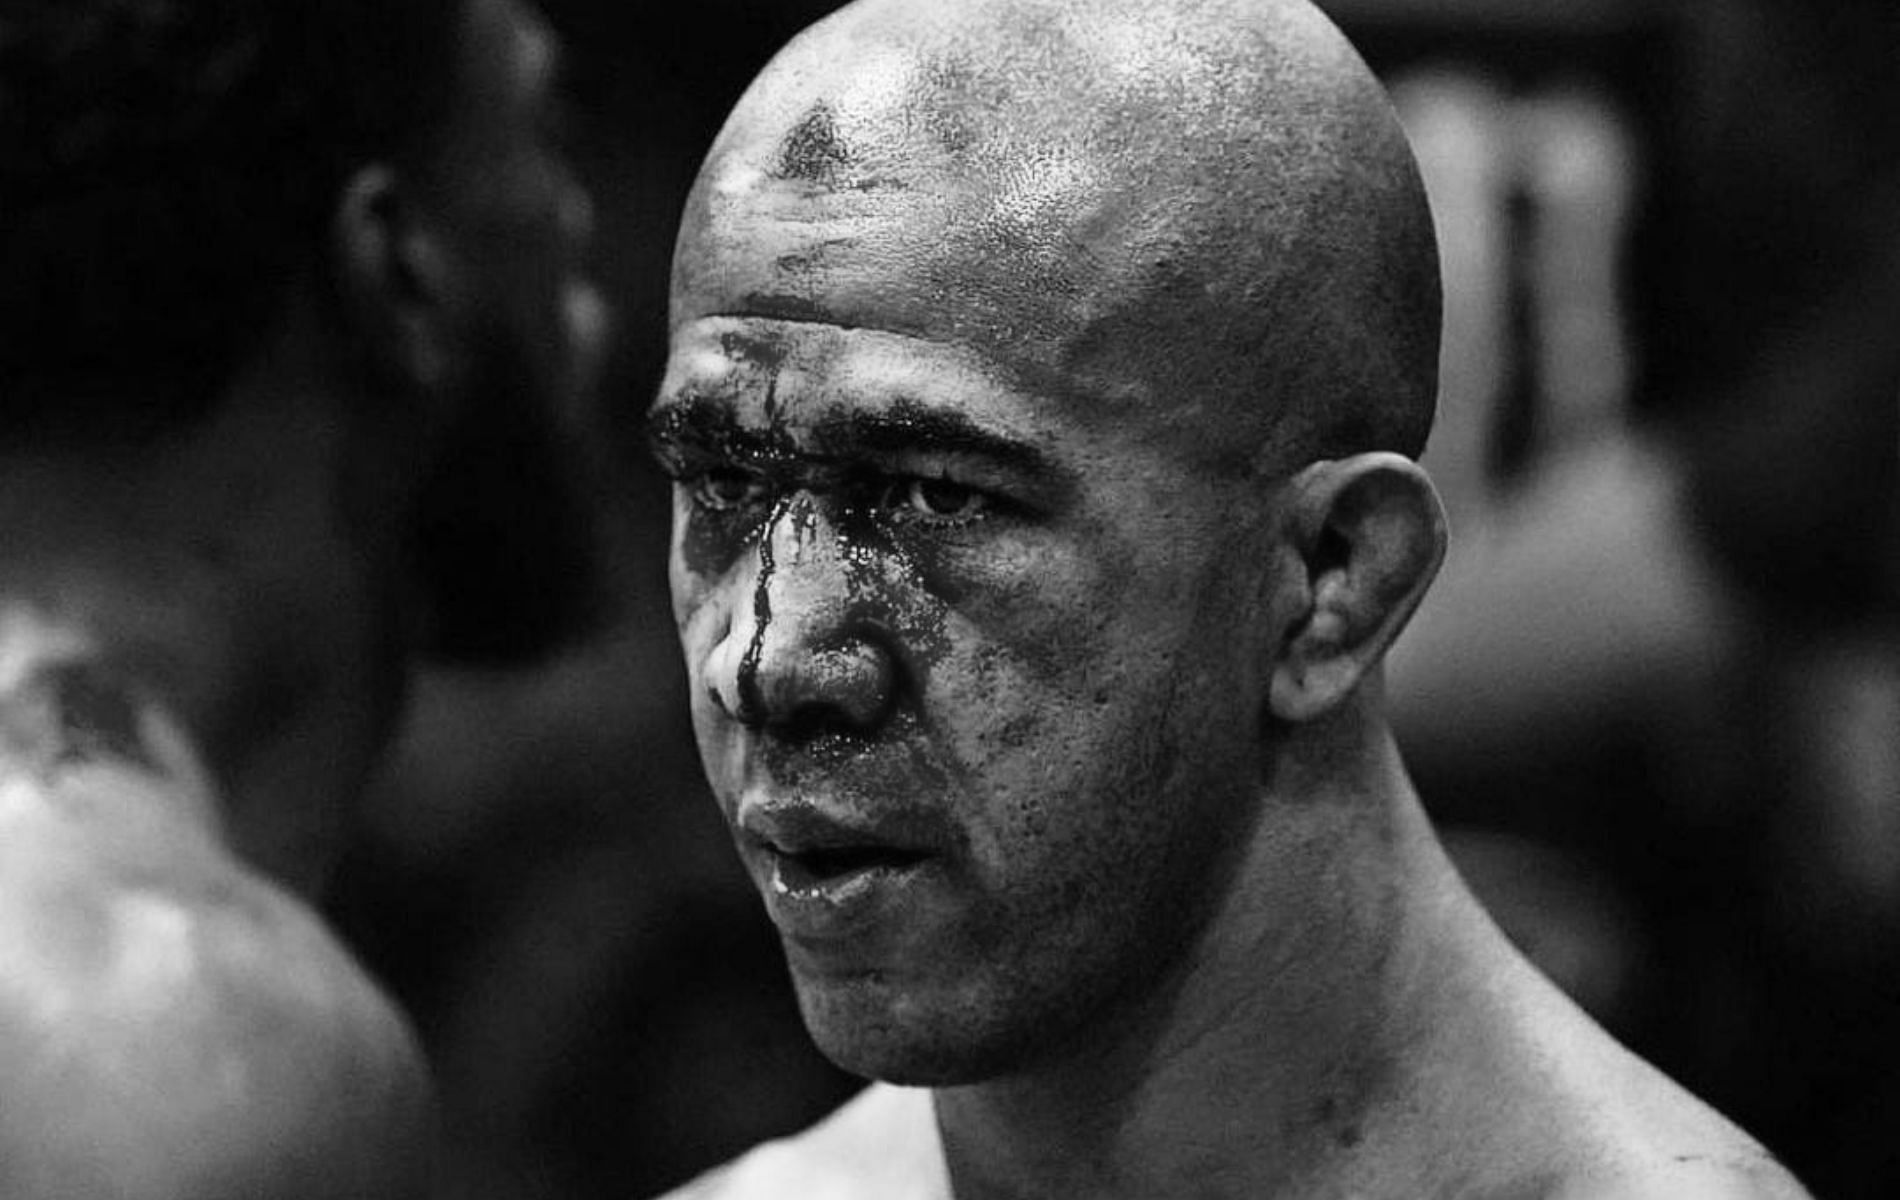 Gregory Rodrigues during his fight against Chidi Njokuani at UFC Vegas 60 (Image via Instagram: @gregoryrodriguesmma)